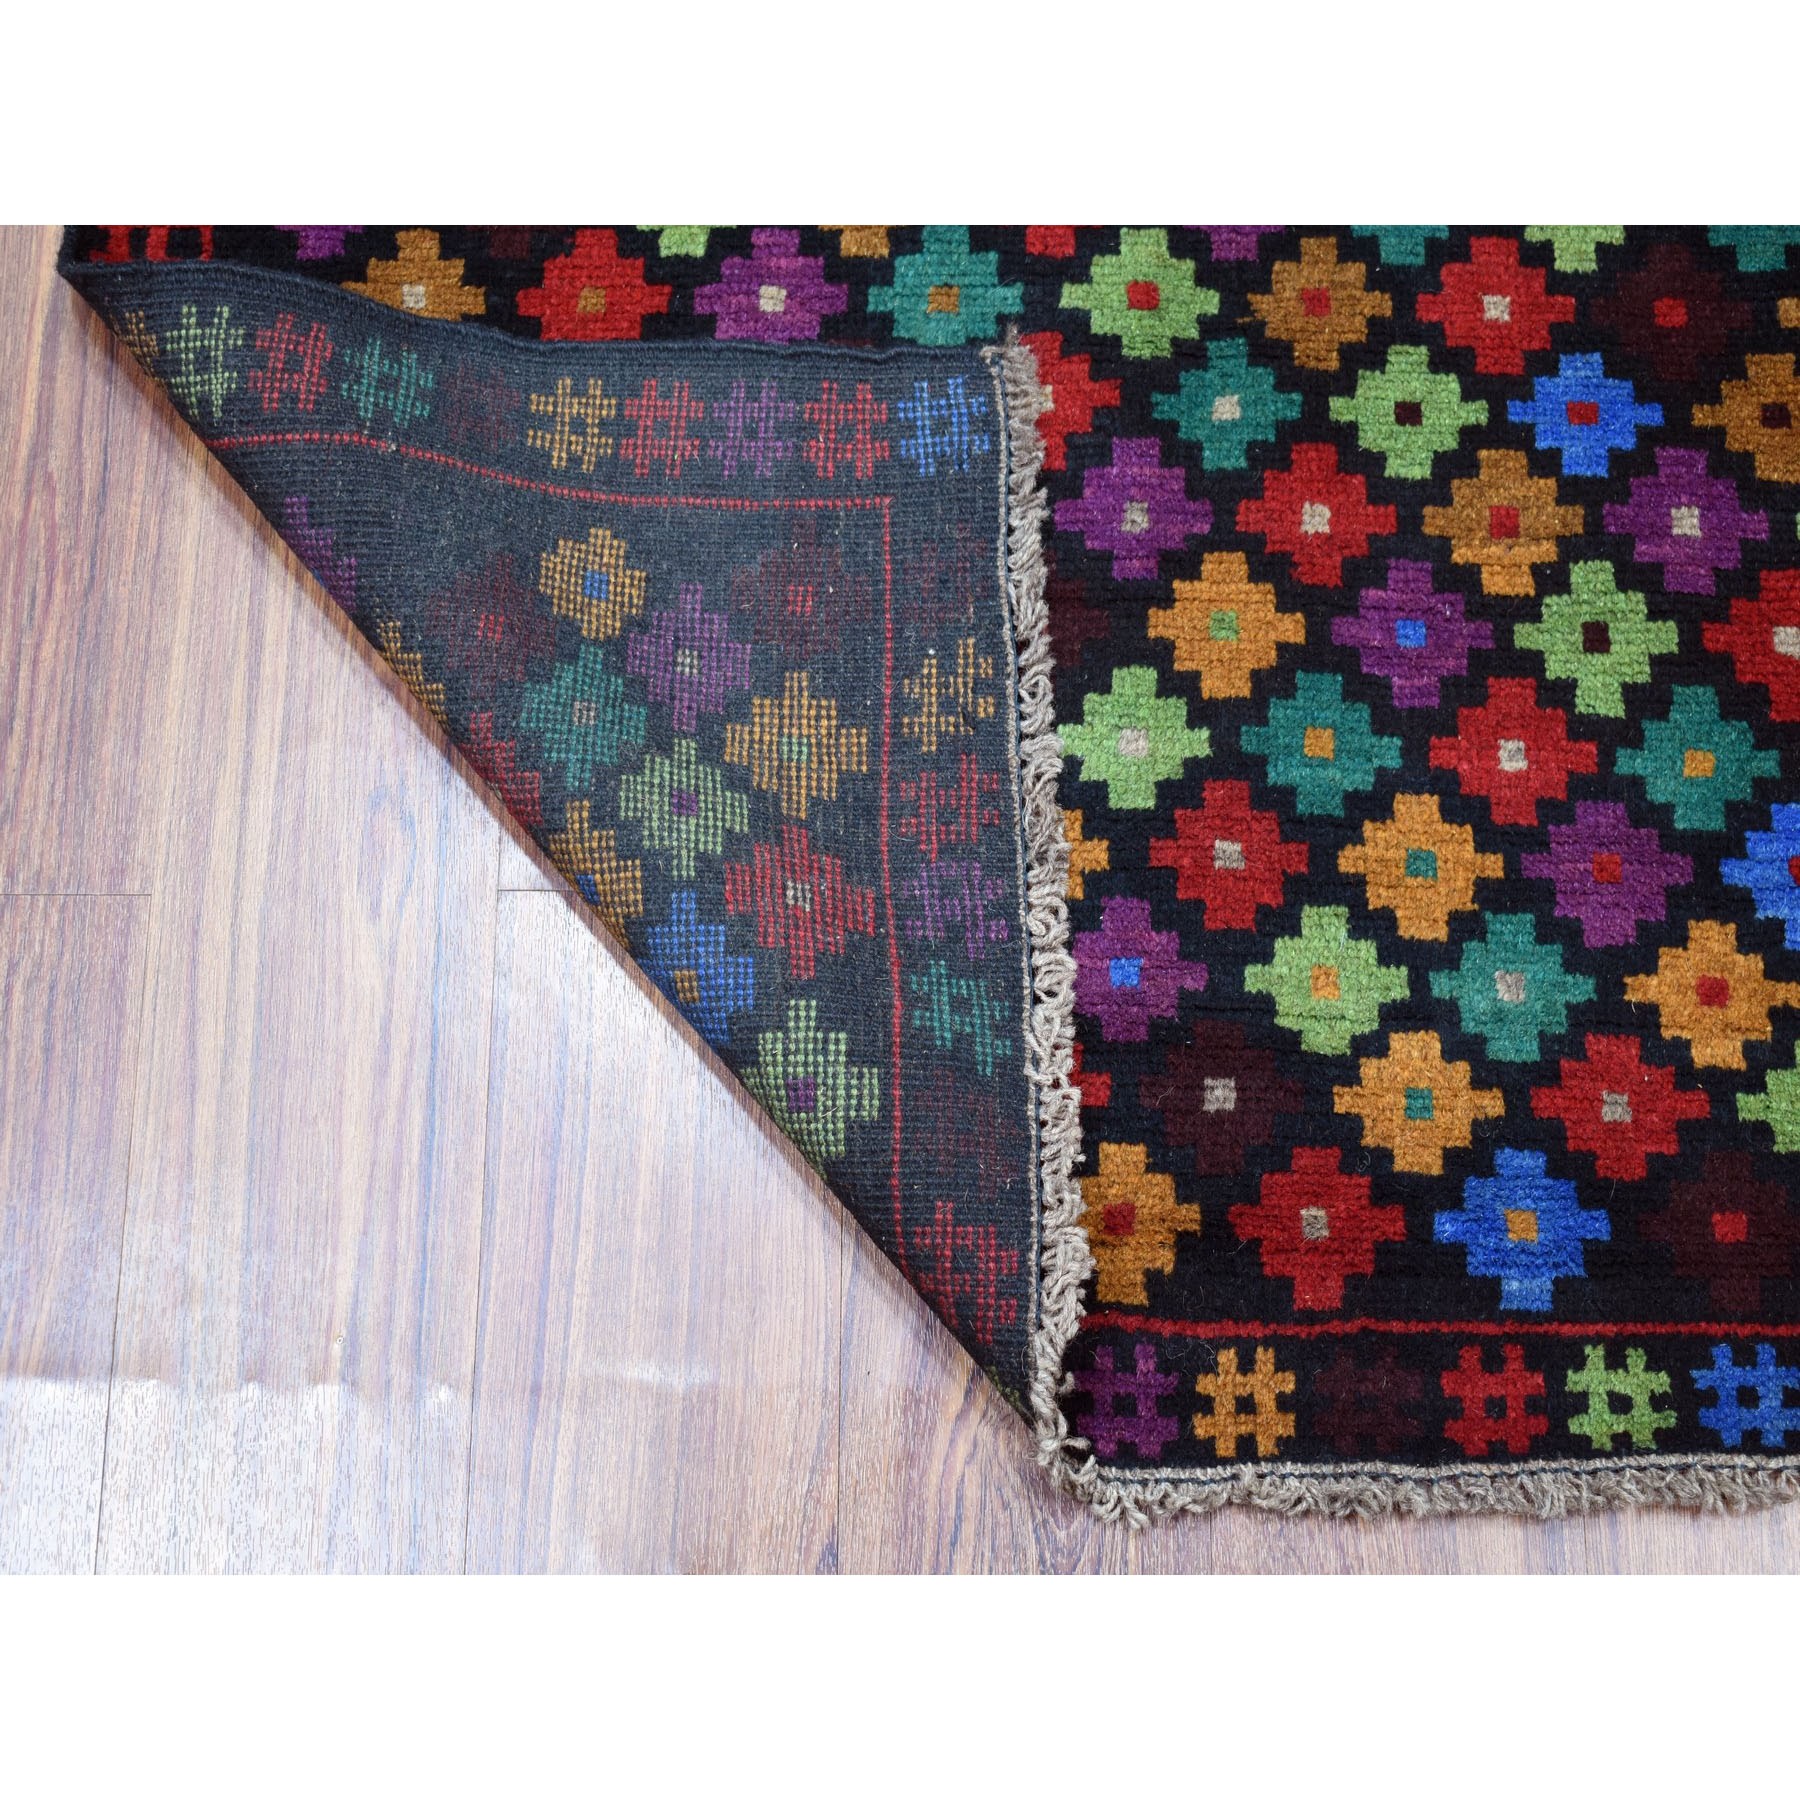 3'5"x5' Colorful Afghan Baluch All Over Design Hand Woven Pure Wool Oriental Rug 